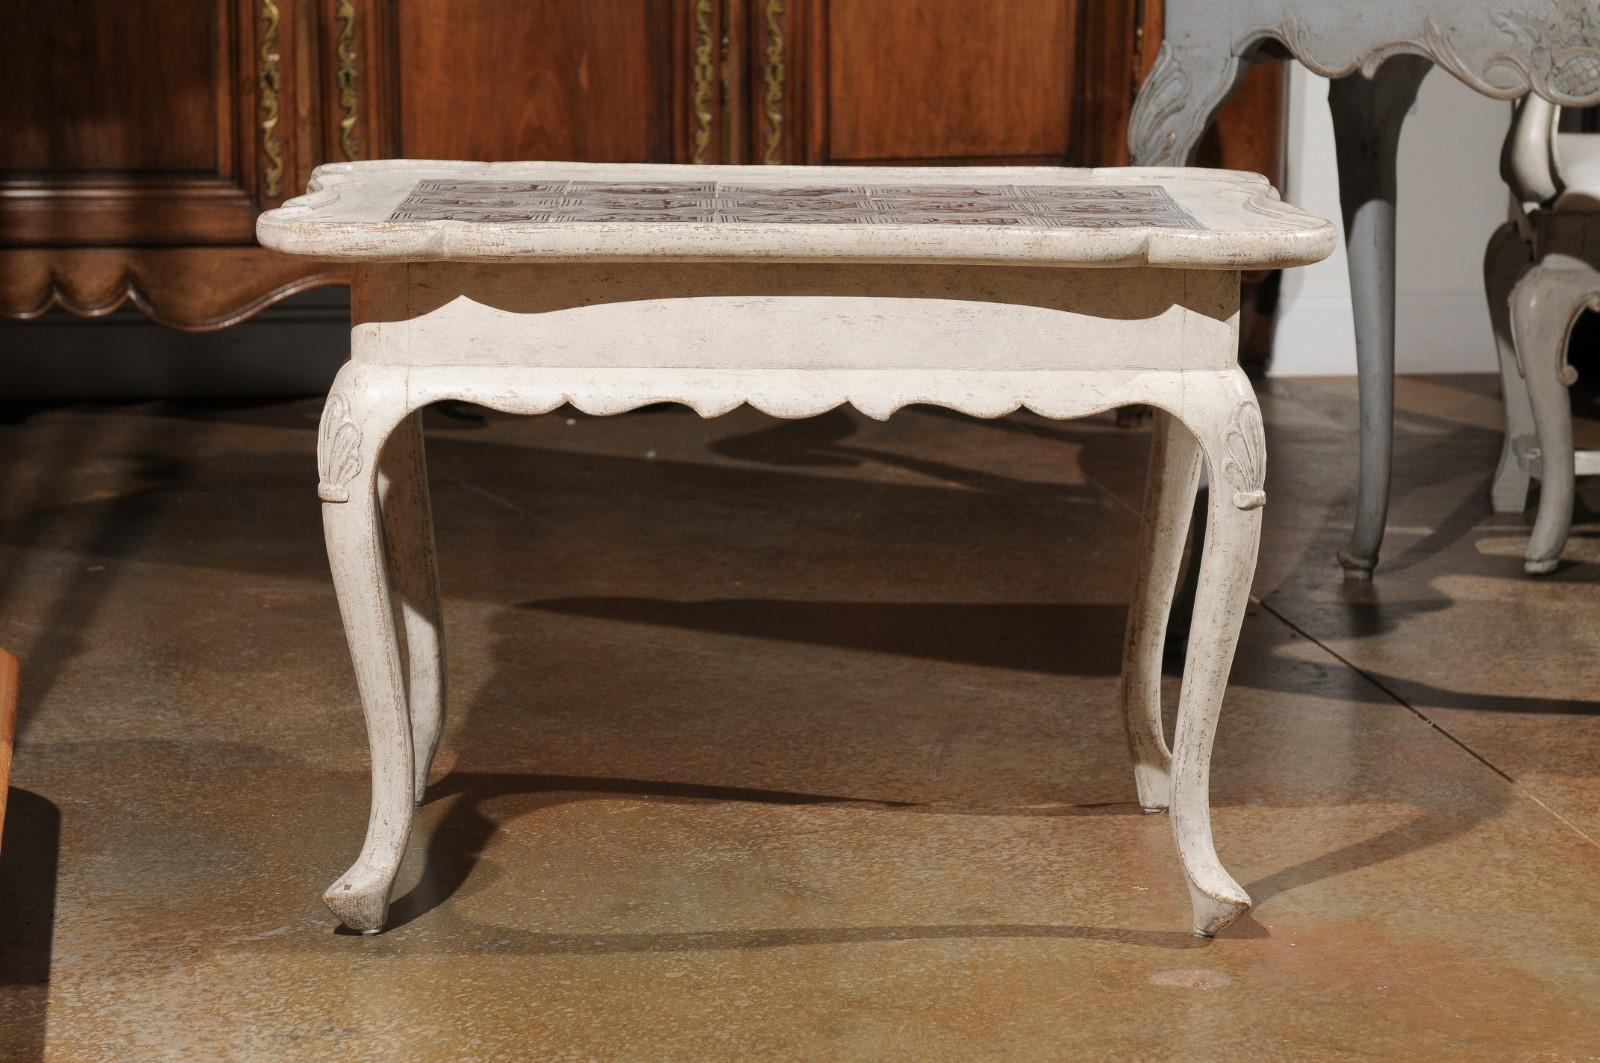 20th Century Danish Rococo Style Painted Table with Tiles, Cabriole Legs and Carved Apron